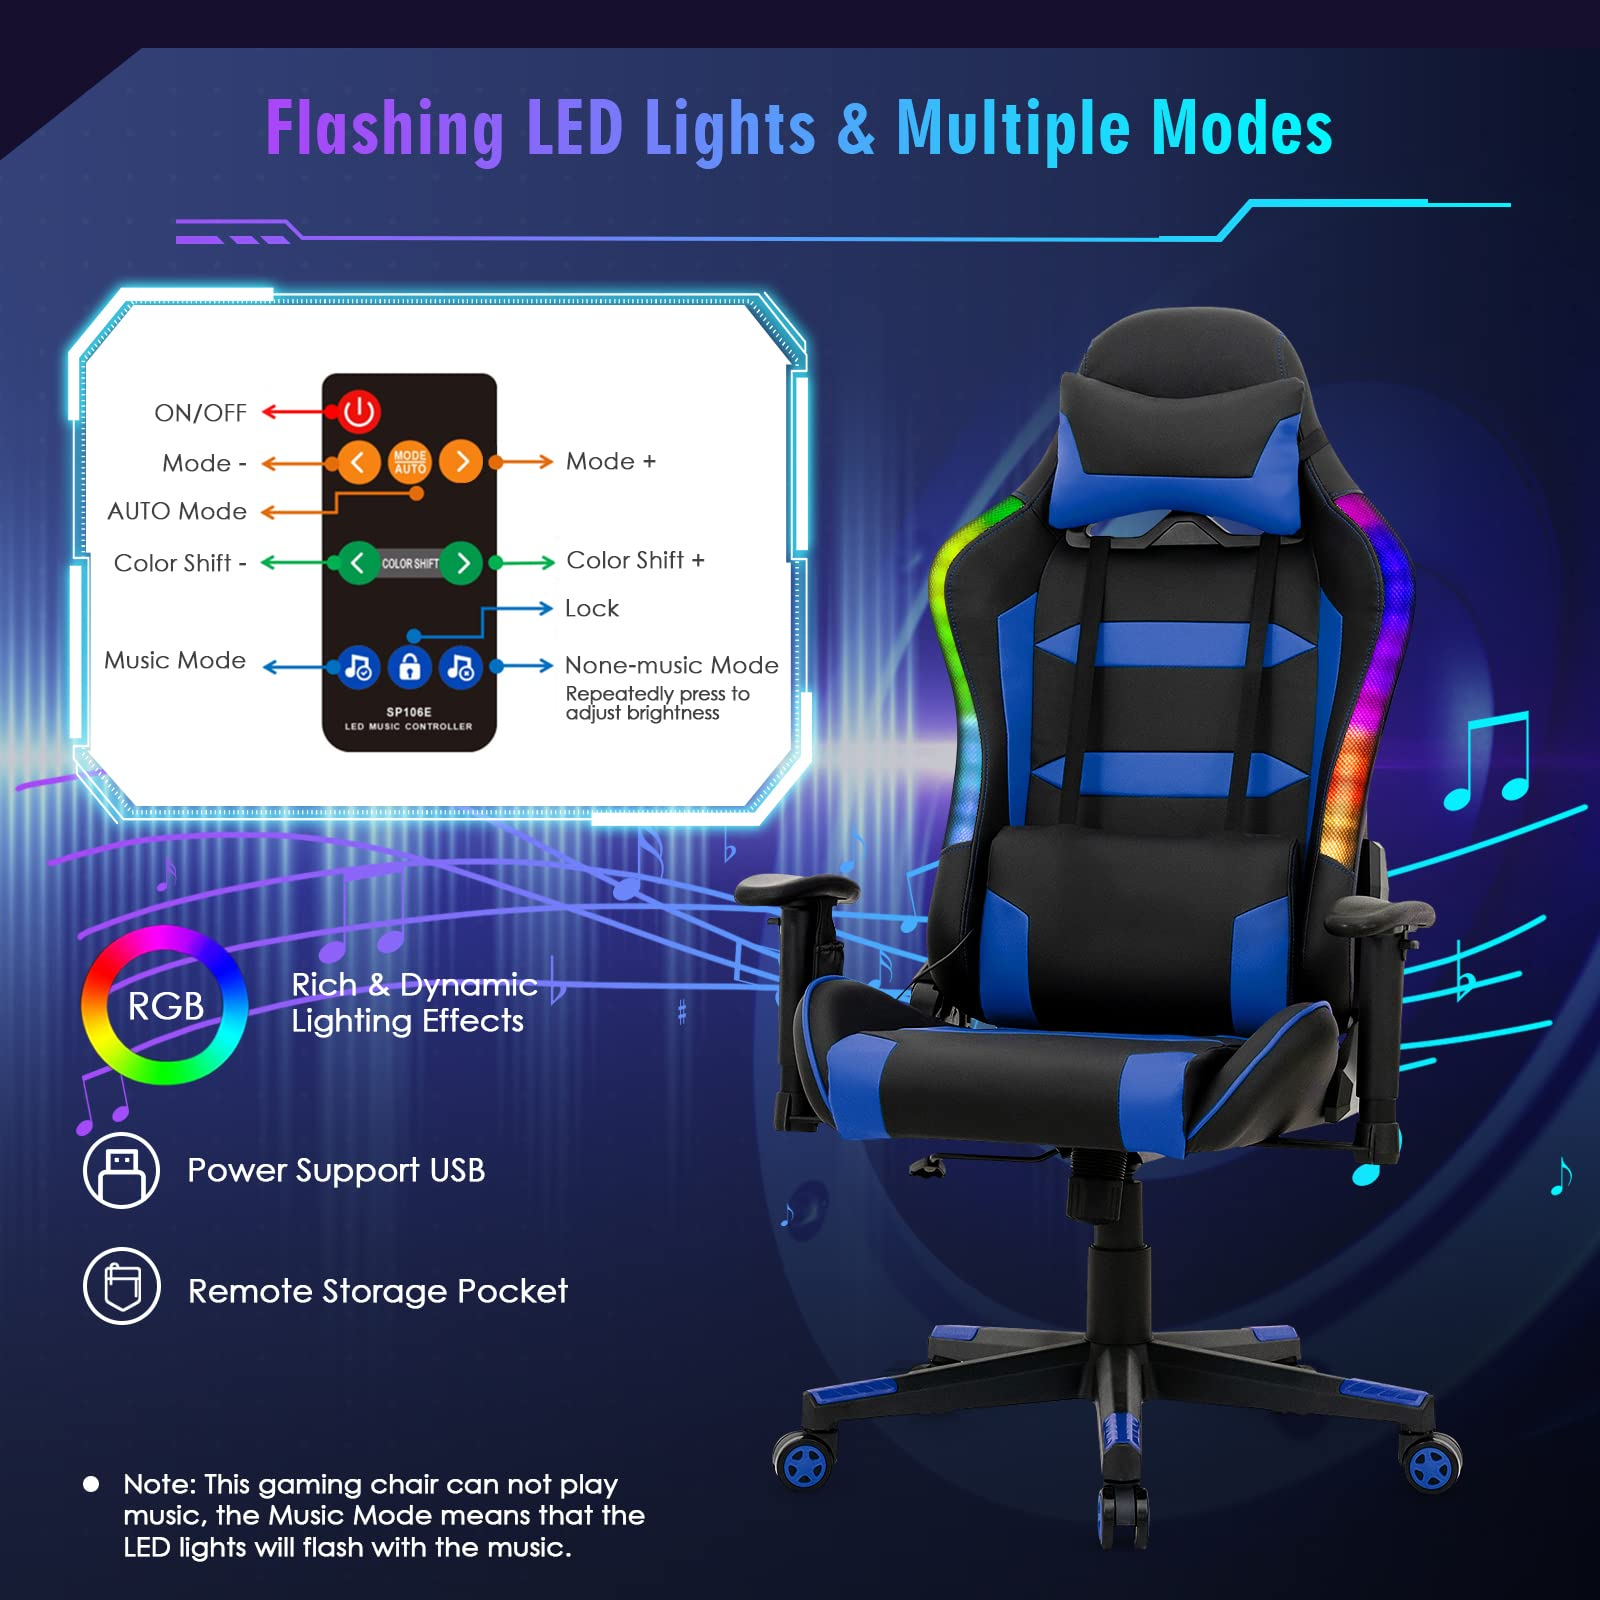 Giantex Gaming Chair with RGB LED Lights, Ergonomic Video Game